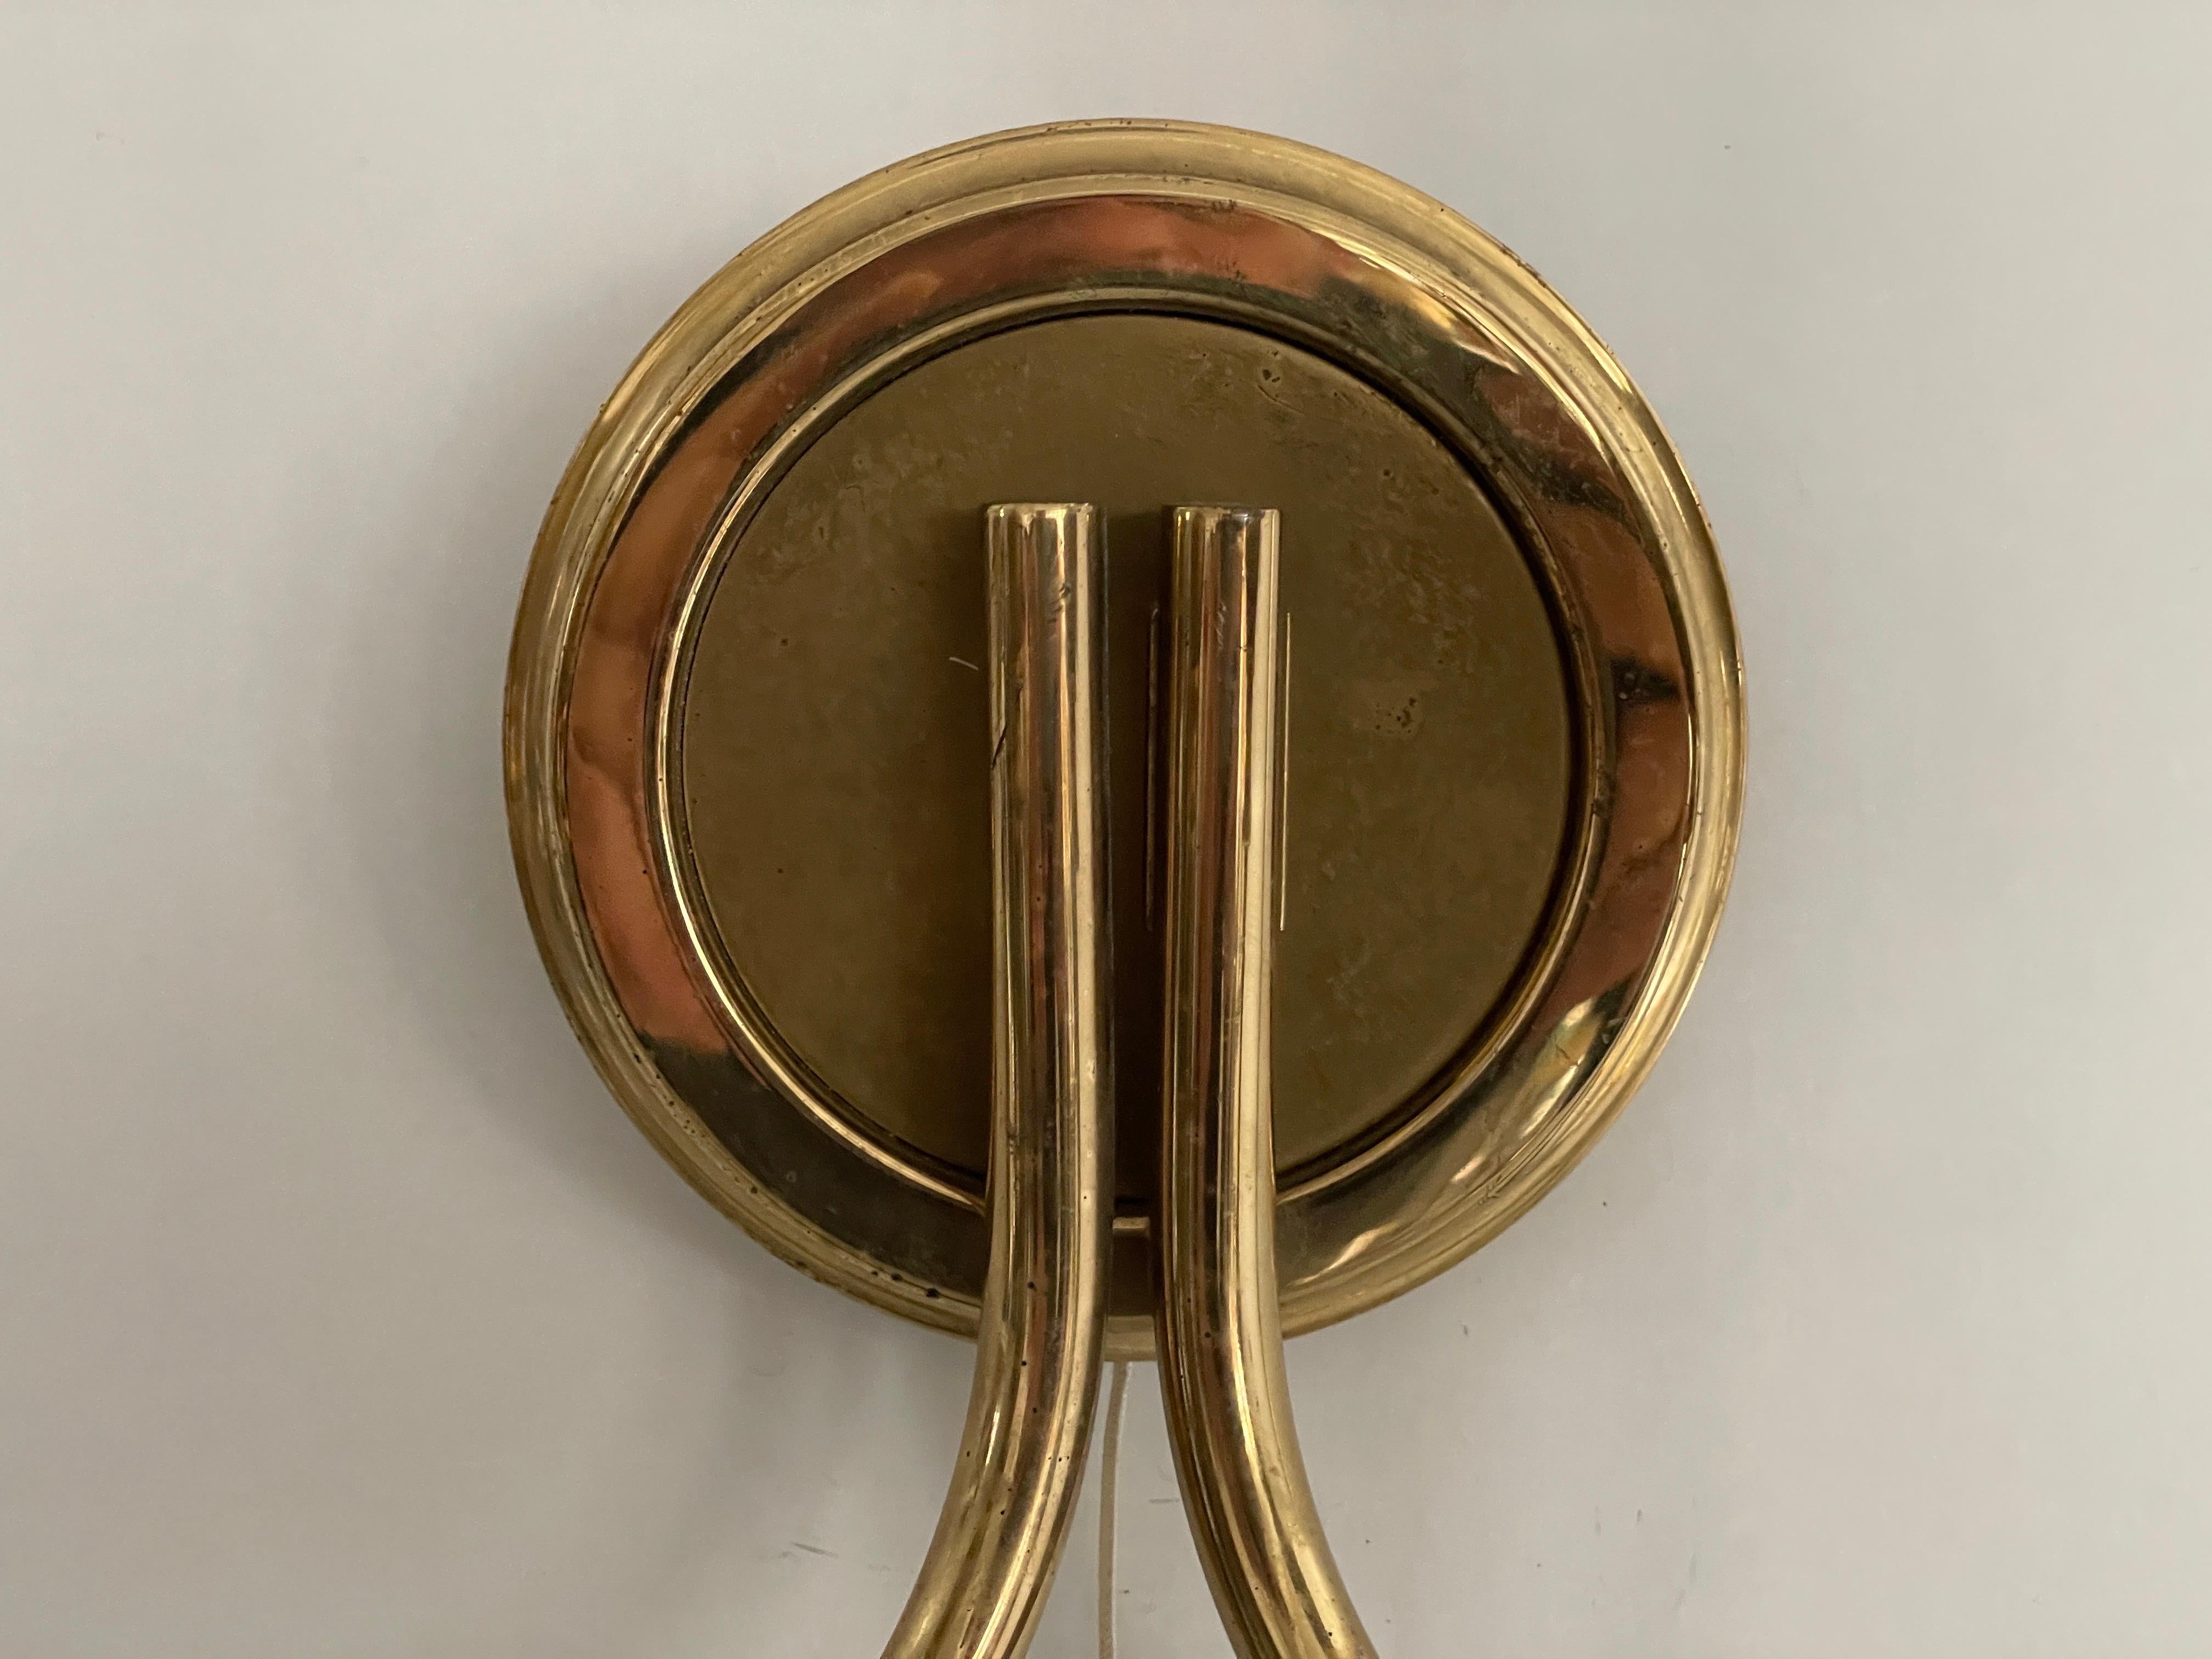 Atomic Design Brass Pair of Sconces by N Leuchten, 1950s, Germany For Sale 3